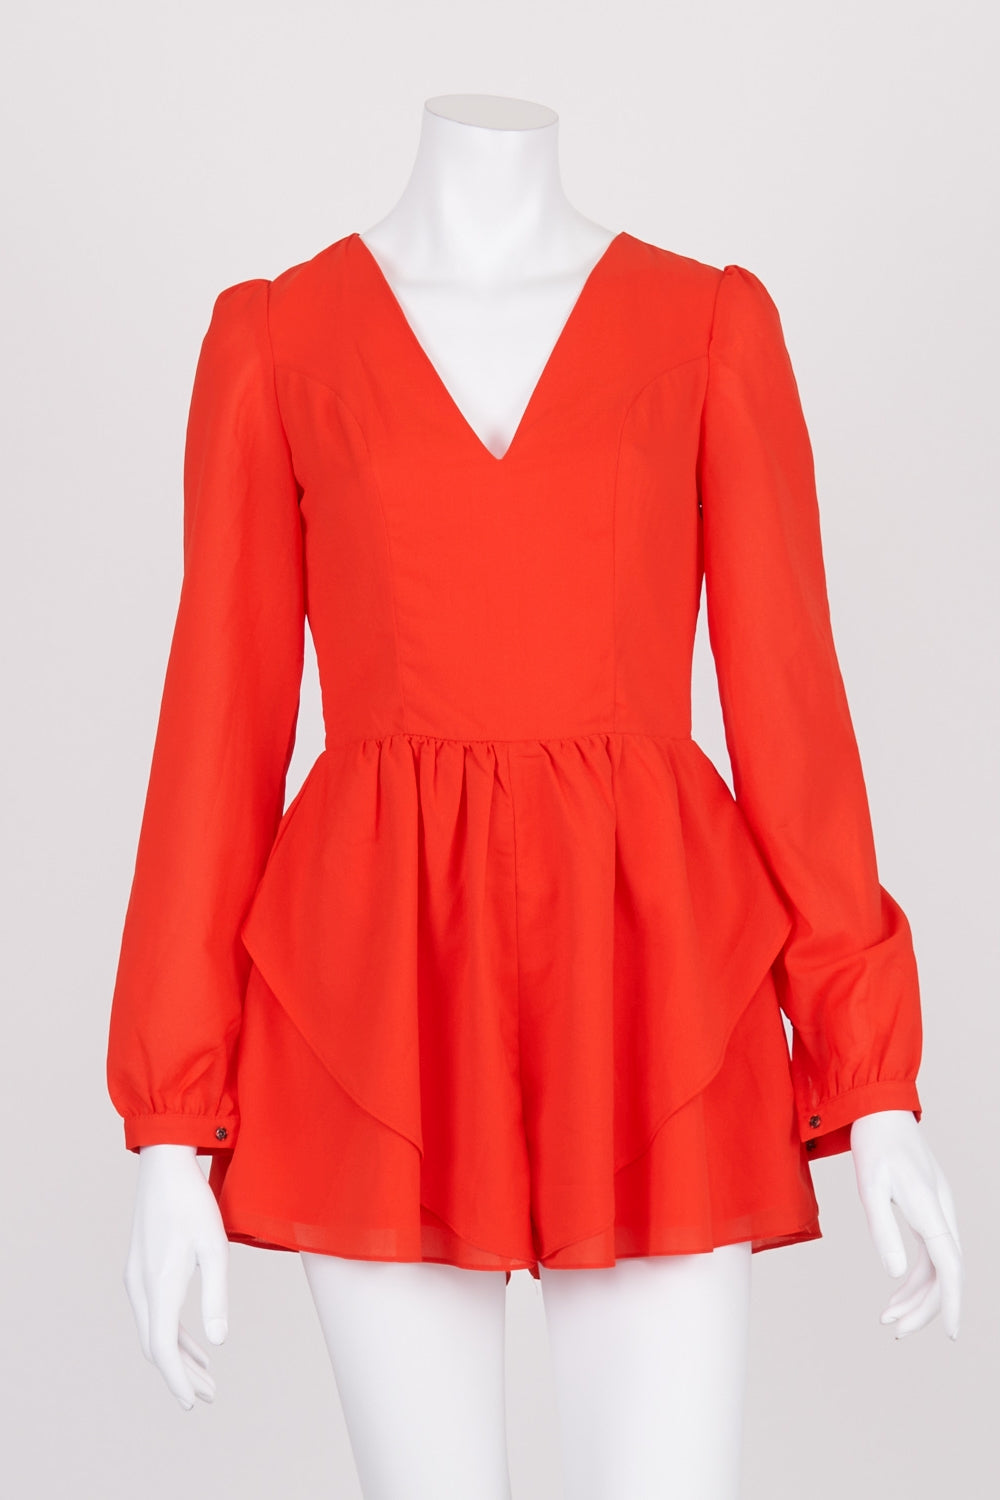 White Closet Red Long Sleeve Playsuit 8